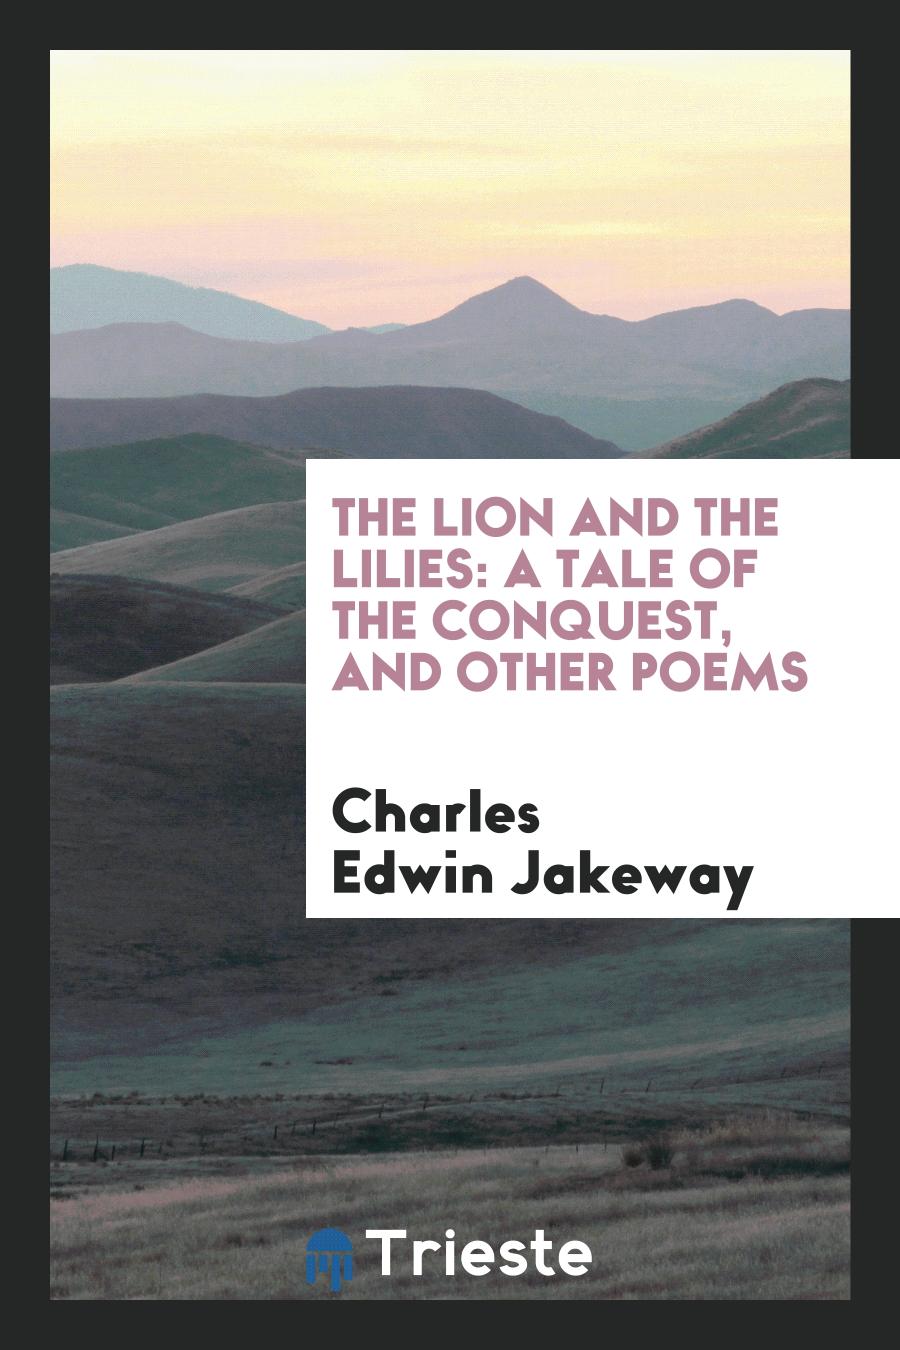 The Lion and the Lilies: A Tale of the Conquest, and Other Poems